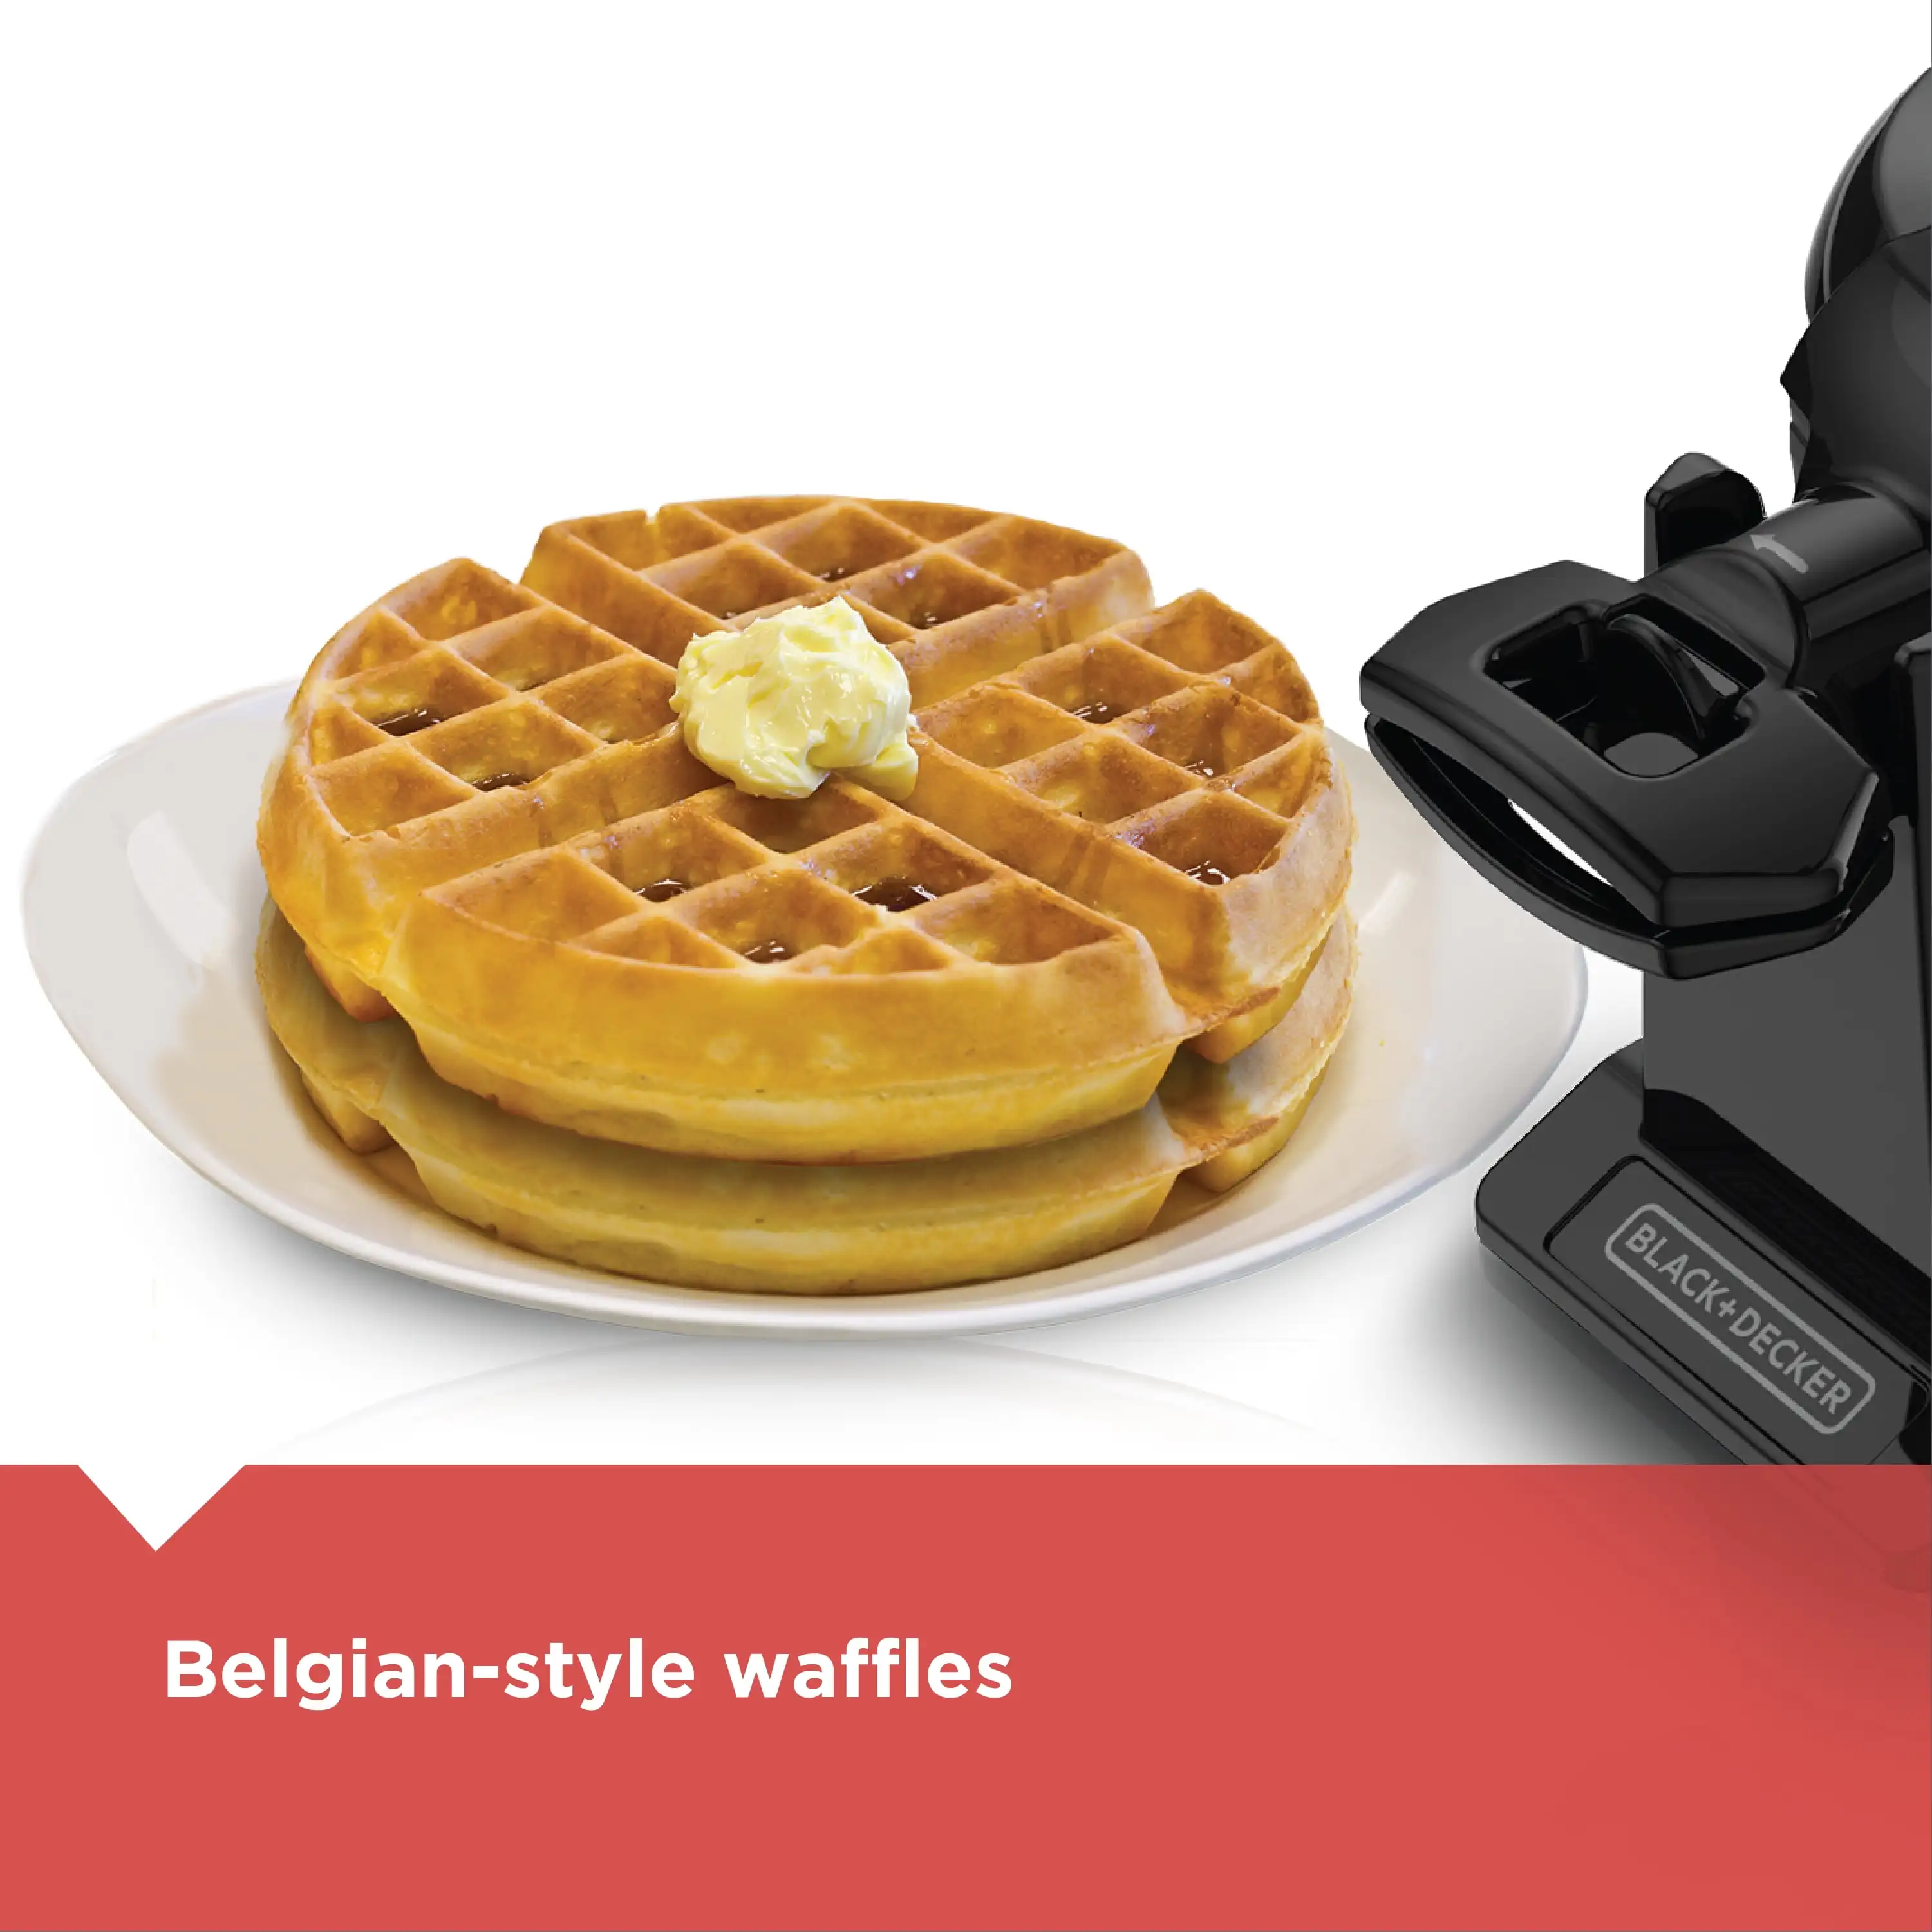 https://ae01.alicdn.com/kf/S9eb8f7d45f574b3fbfe1e1b5637c67129/BLACK-DECKER-Rotating-Waffle-Maker-with-Dual-Cooking-Plates-Black-WMD200B.jpg